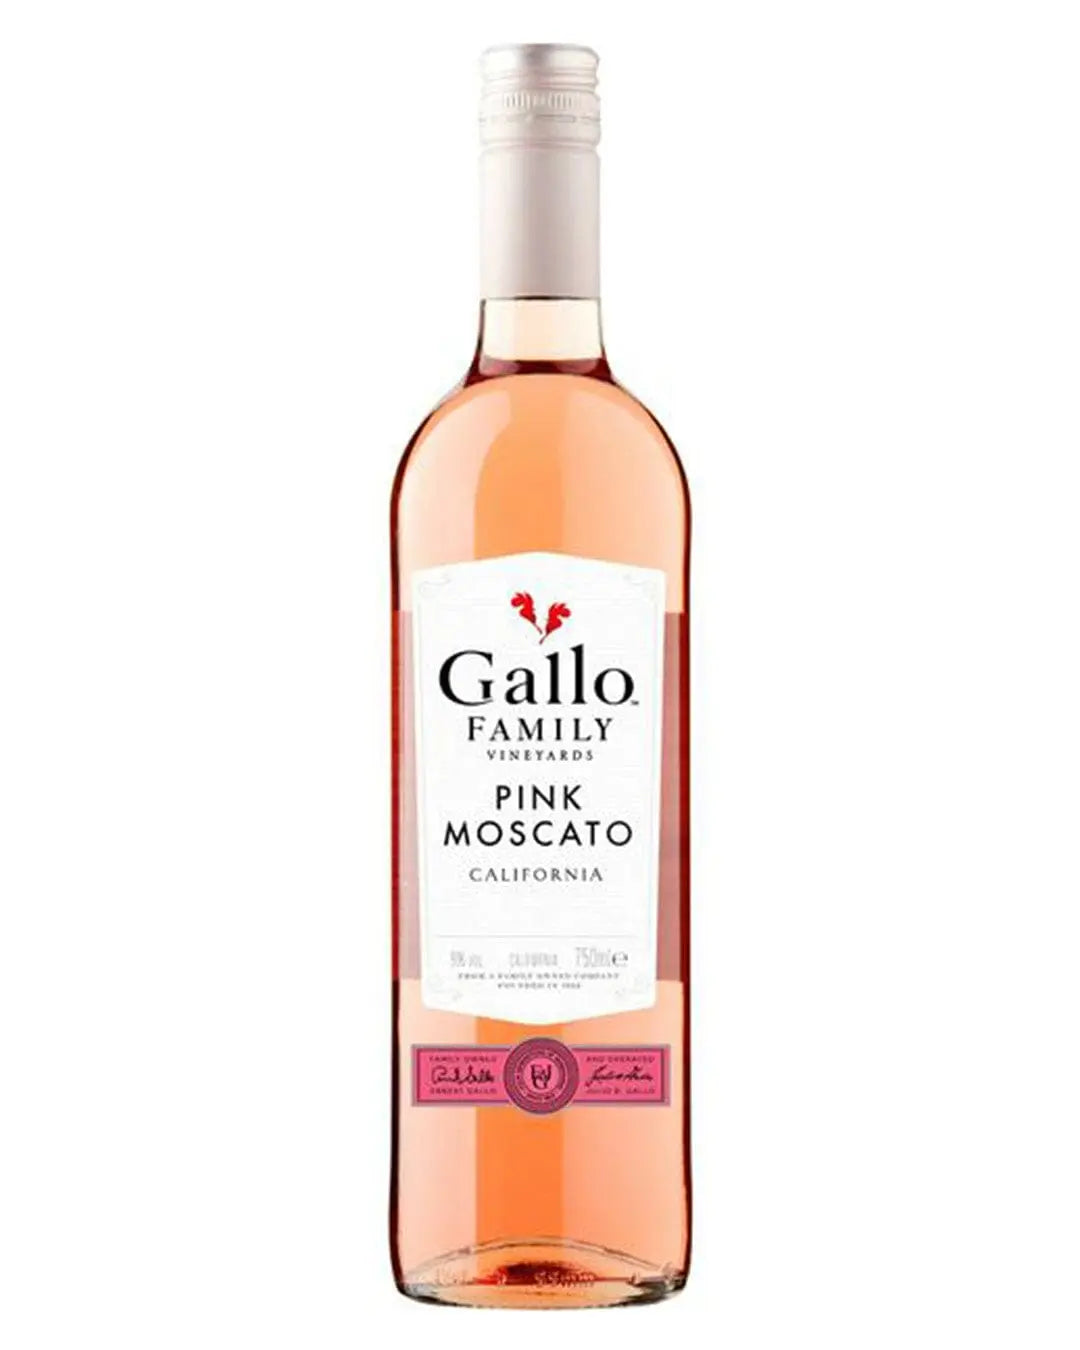 Gallo Family Vineyards Pink Moscato, 75 cl Rose Wine